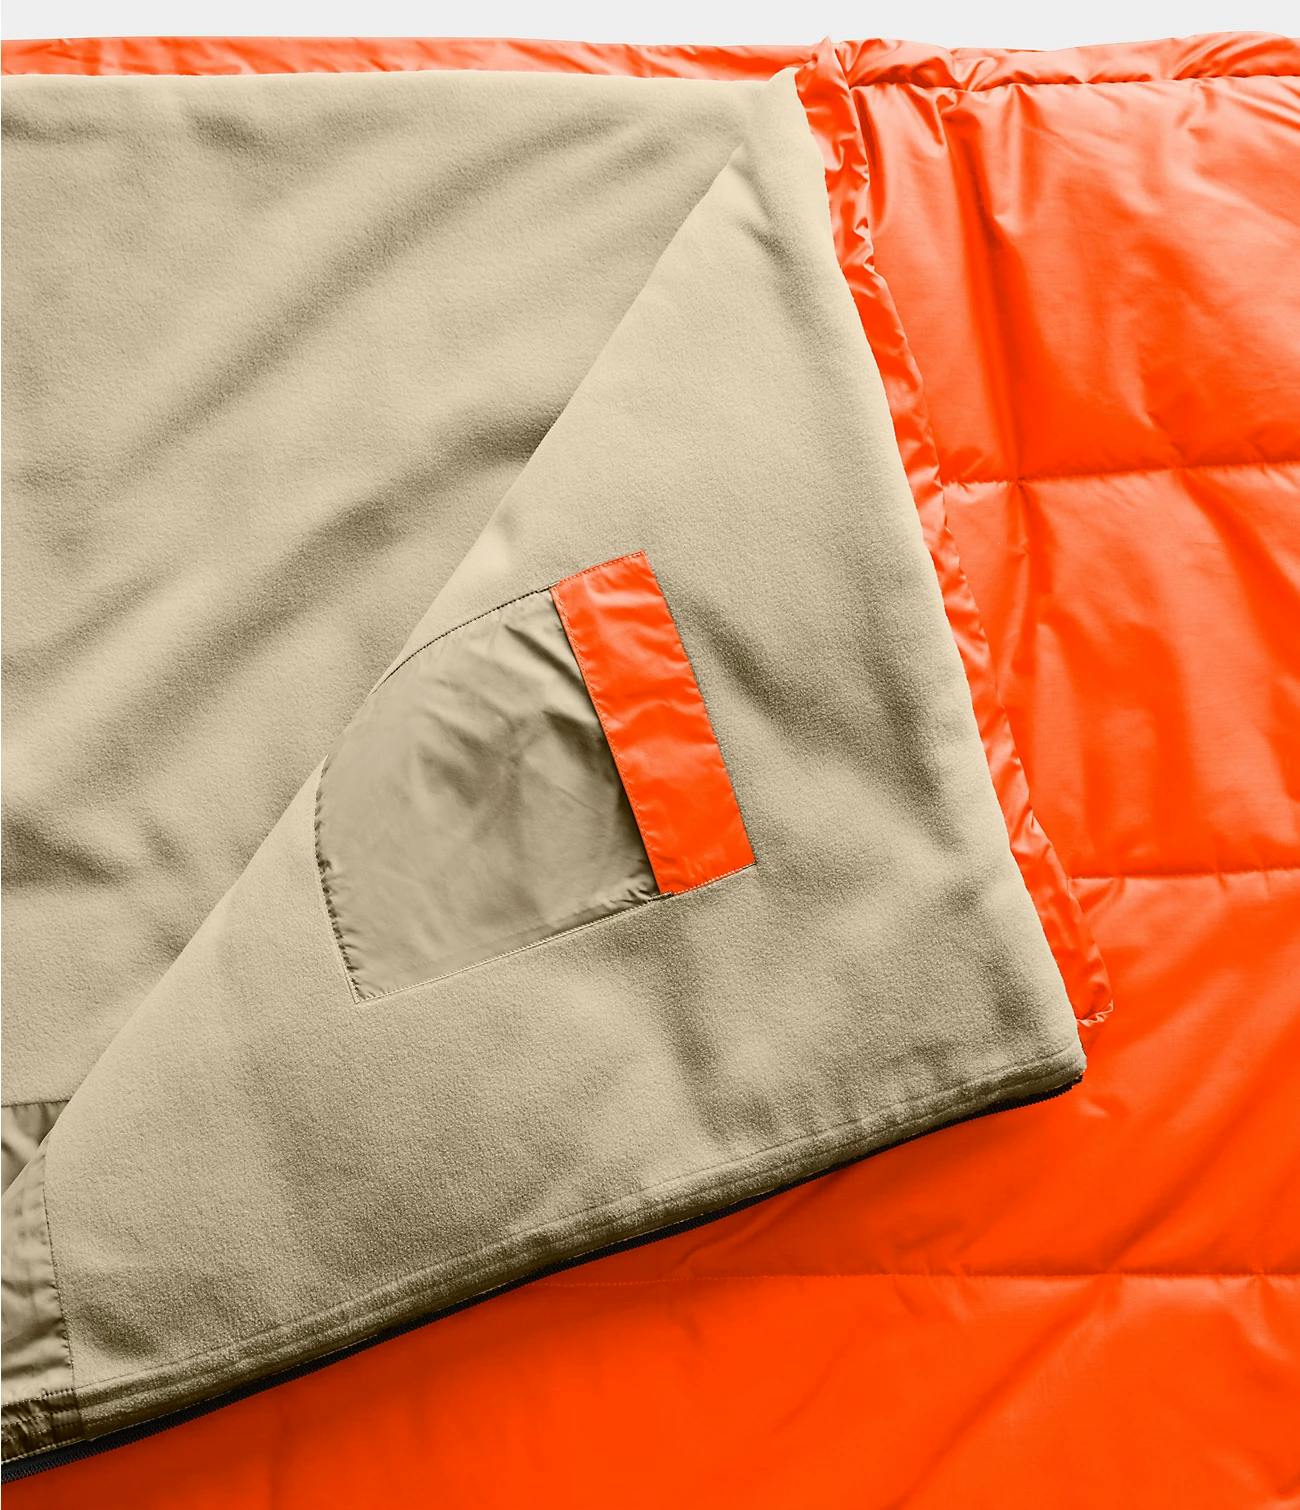 The North Face Eco Trail Bed 35 Sleeping Bag- Men's  Persian Orange/Twill Beige